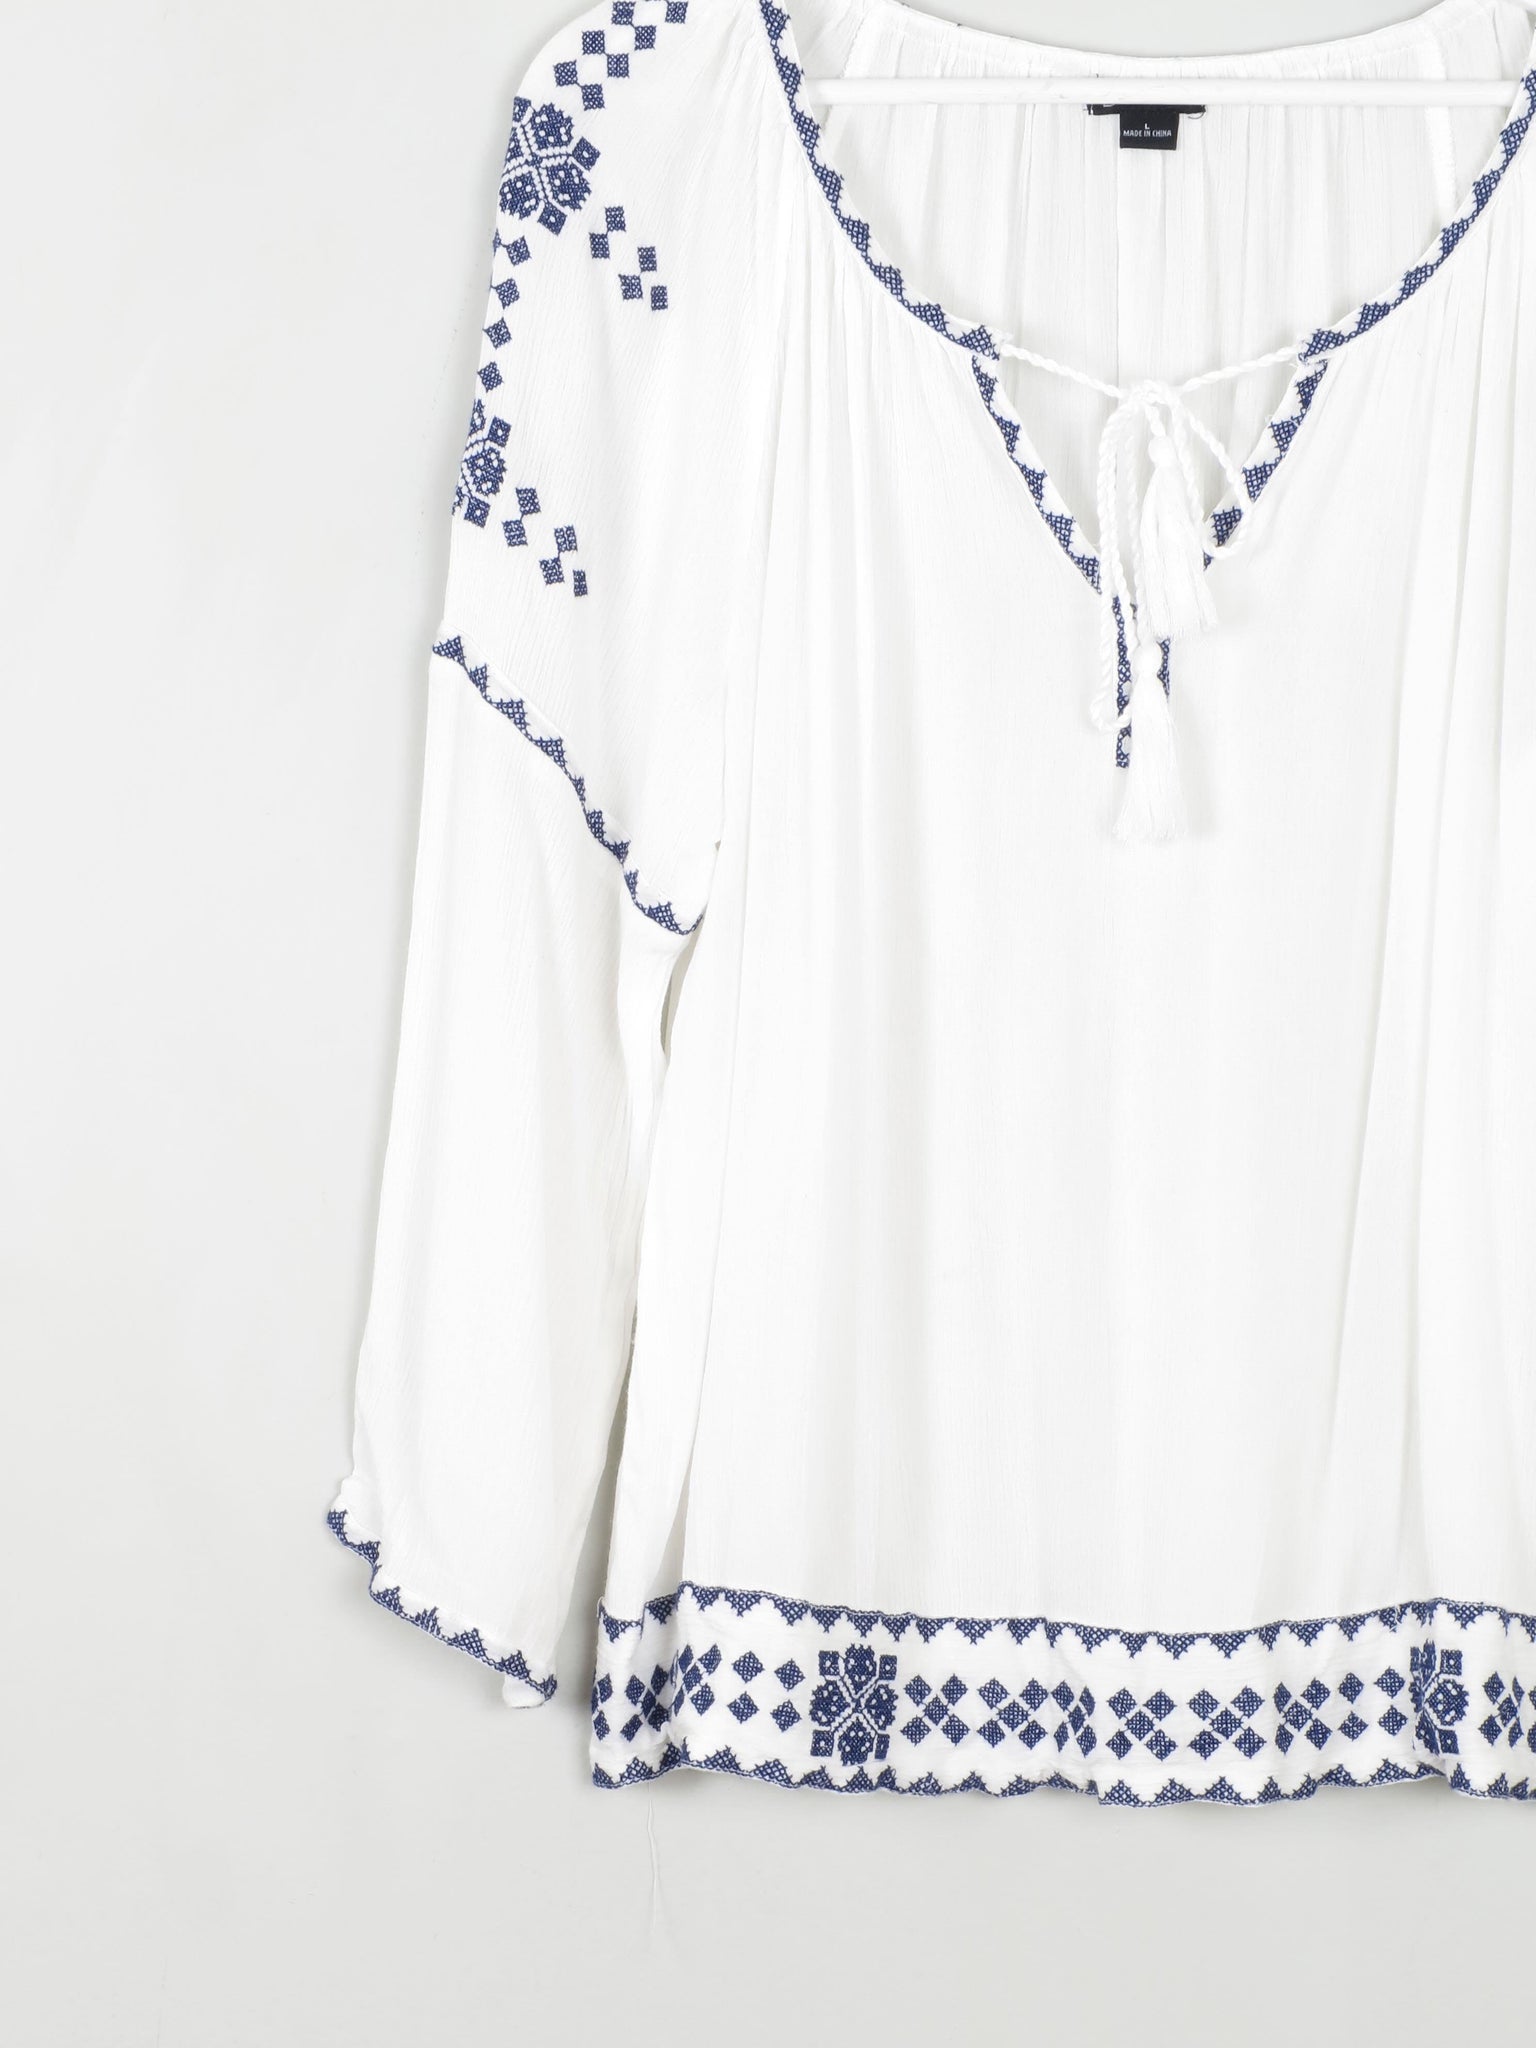 Women's Embroidered Ethnic Vintage Style Top M/L - The Harlequin